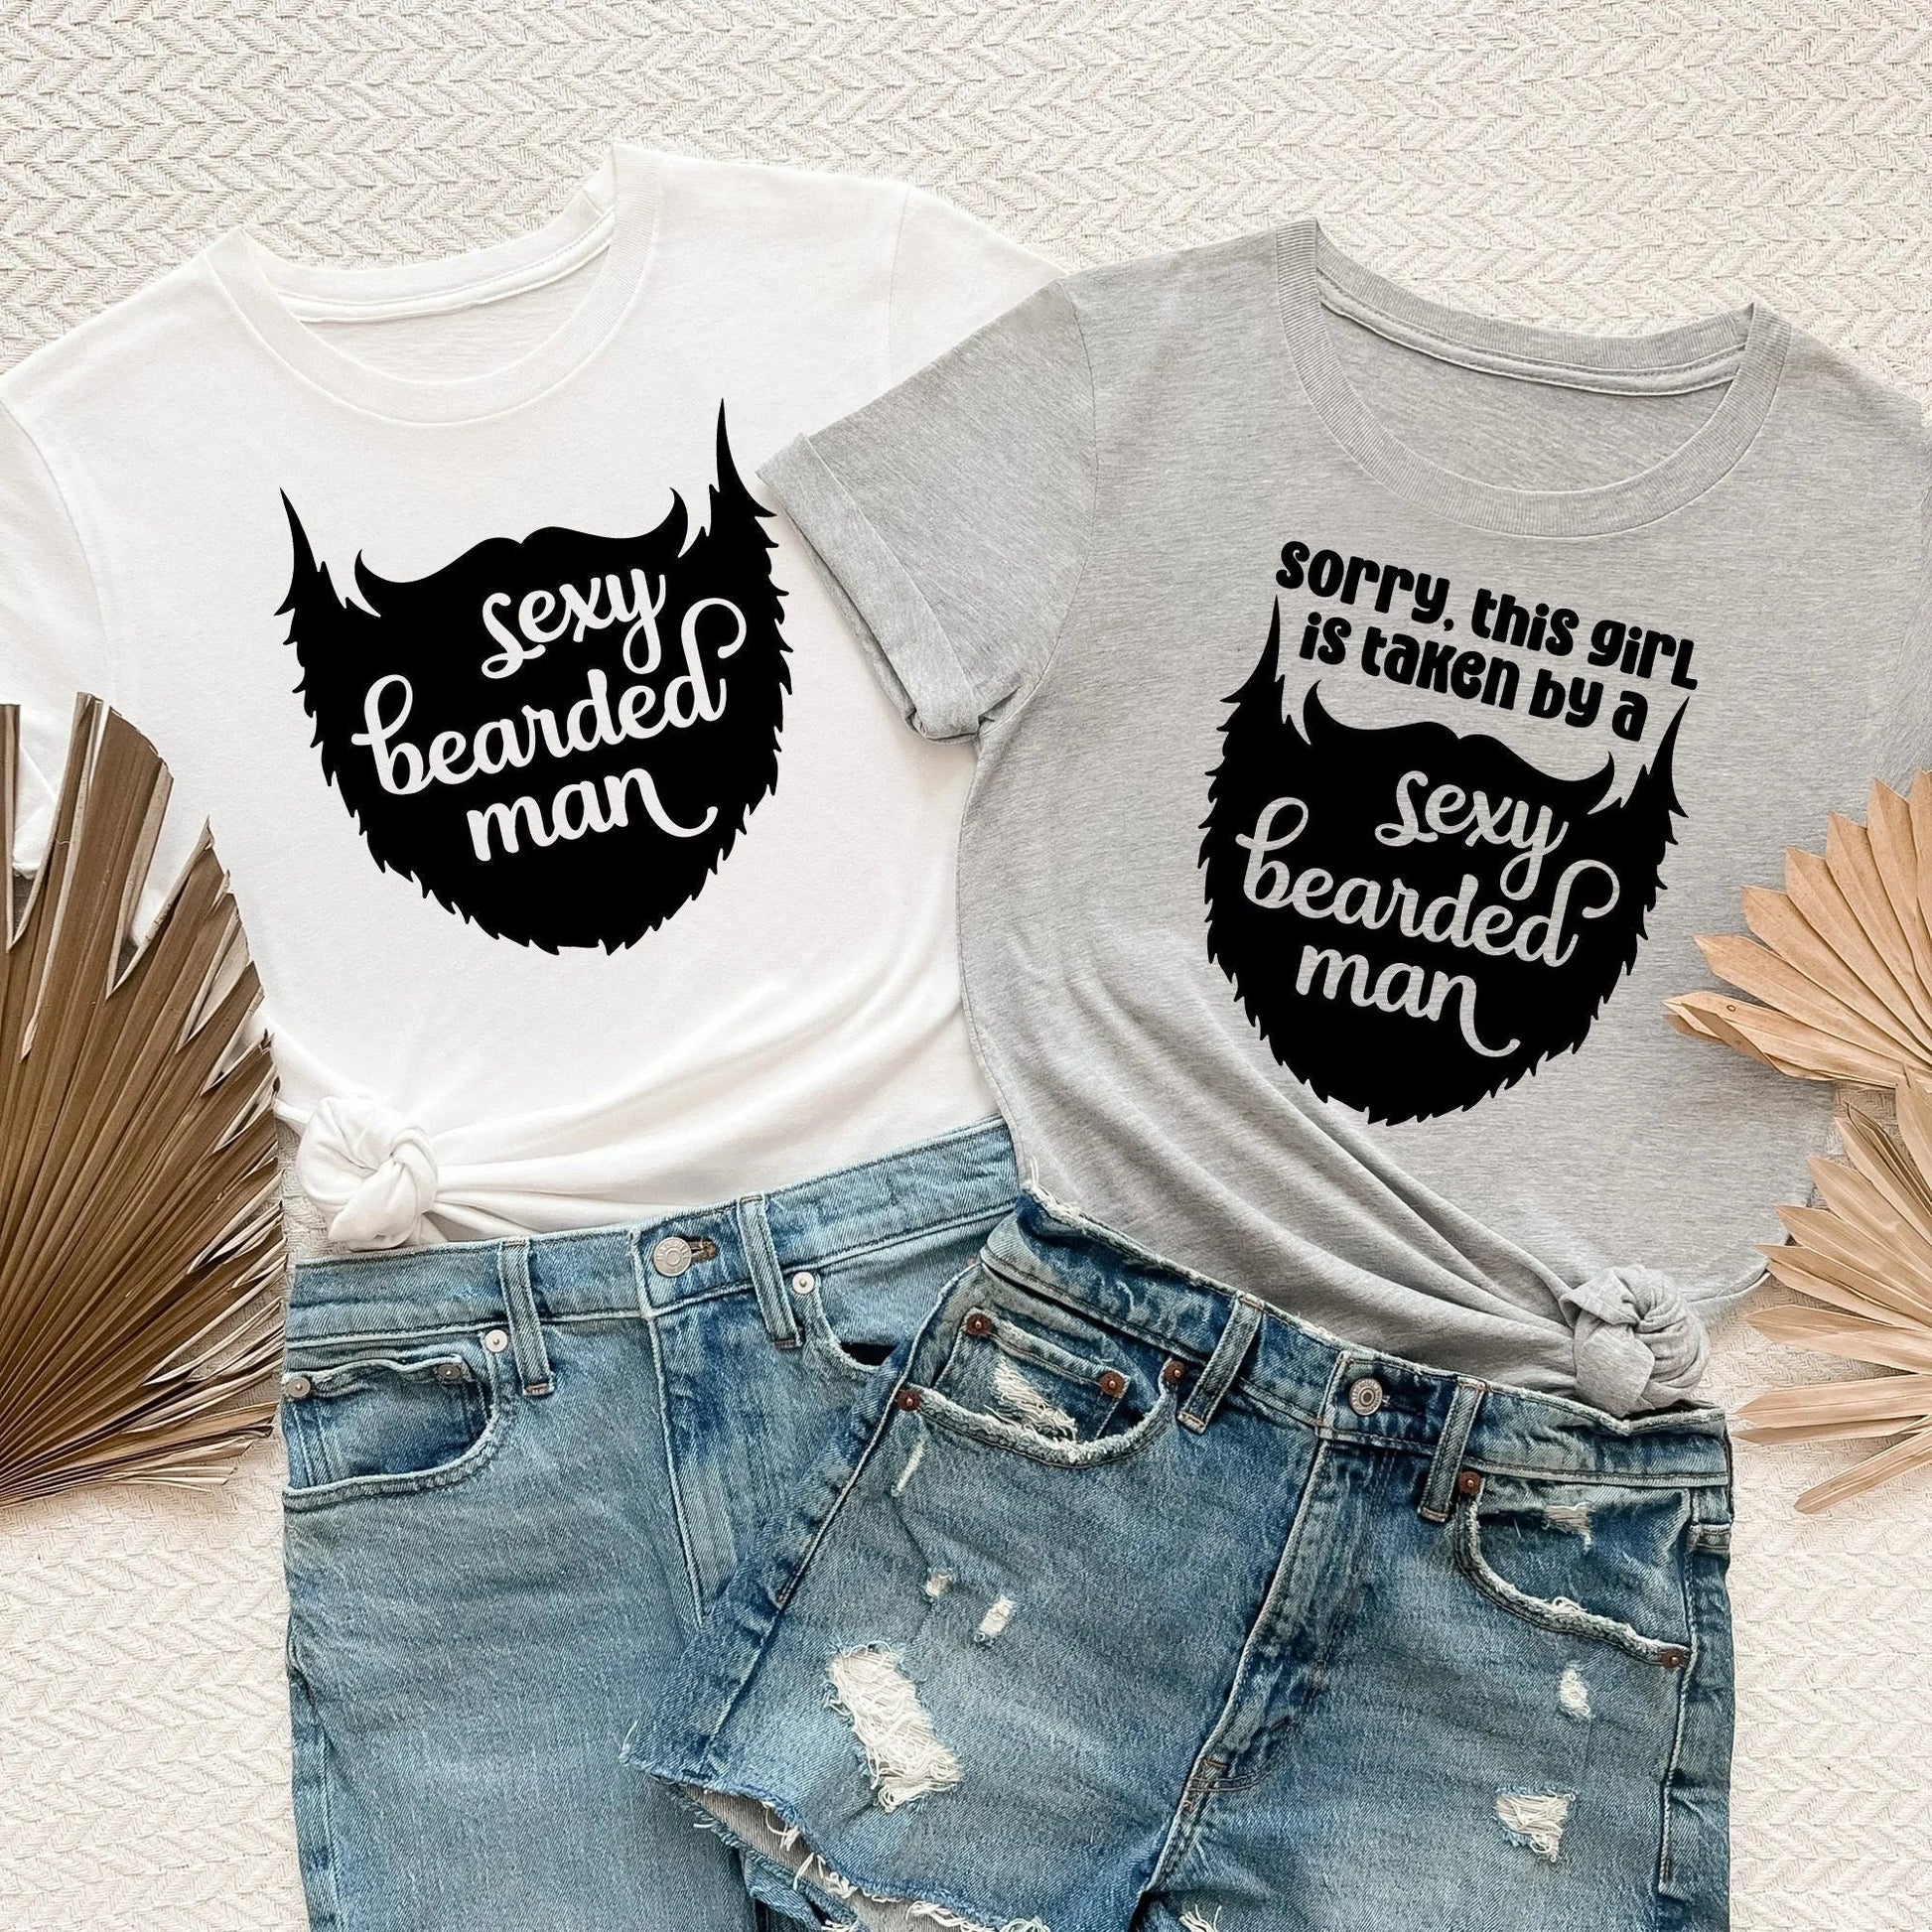 Couples Shirts, Couples gift for boyfriend, Beard Lover Gift, Engagement Announcement Photos, Cute Couples Sweaters/Hoodie, Wedding Present HMDesignStudioUS